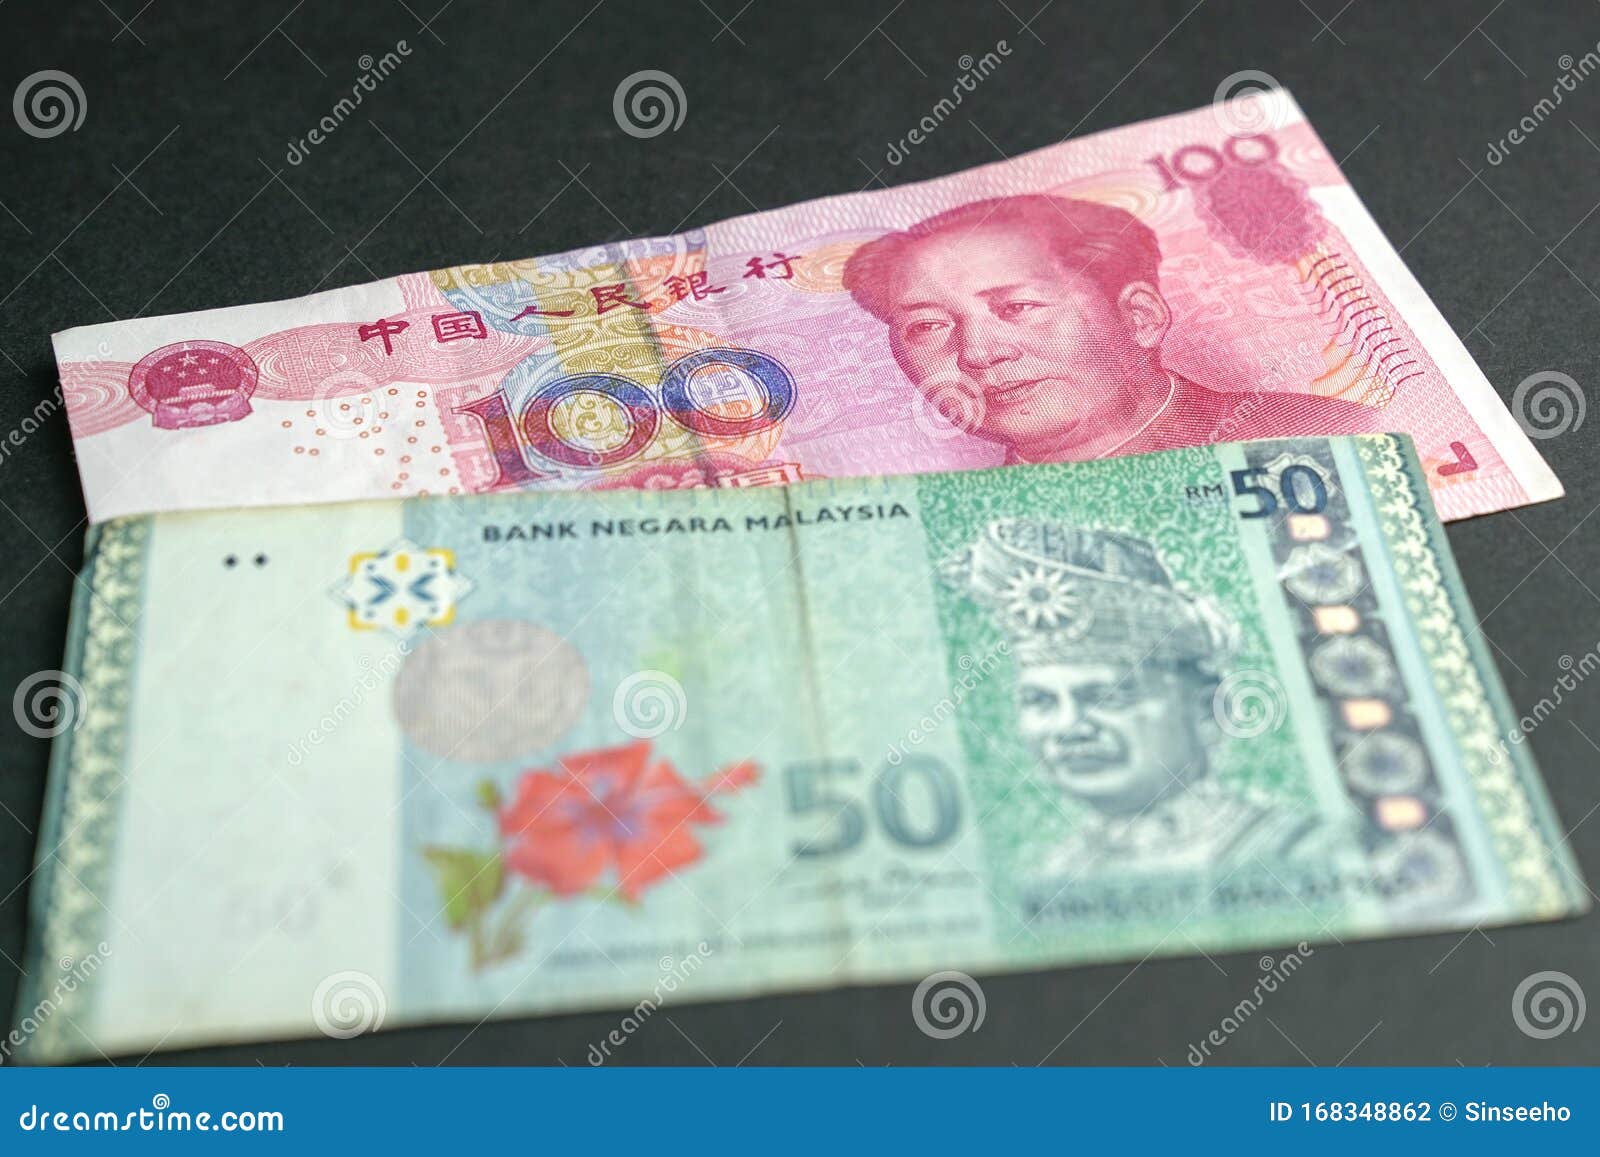 Convert MYR to CNY - Malaysian Ringgit to Chinese Yuan Exchange Rate | CoinCodex